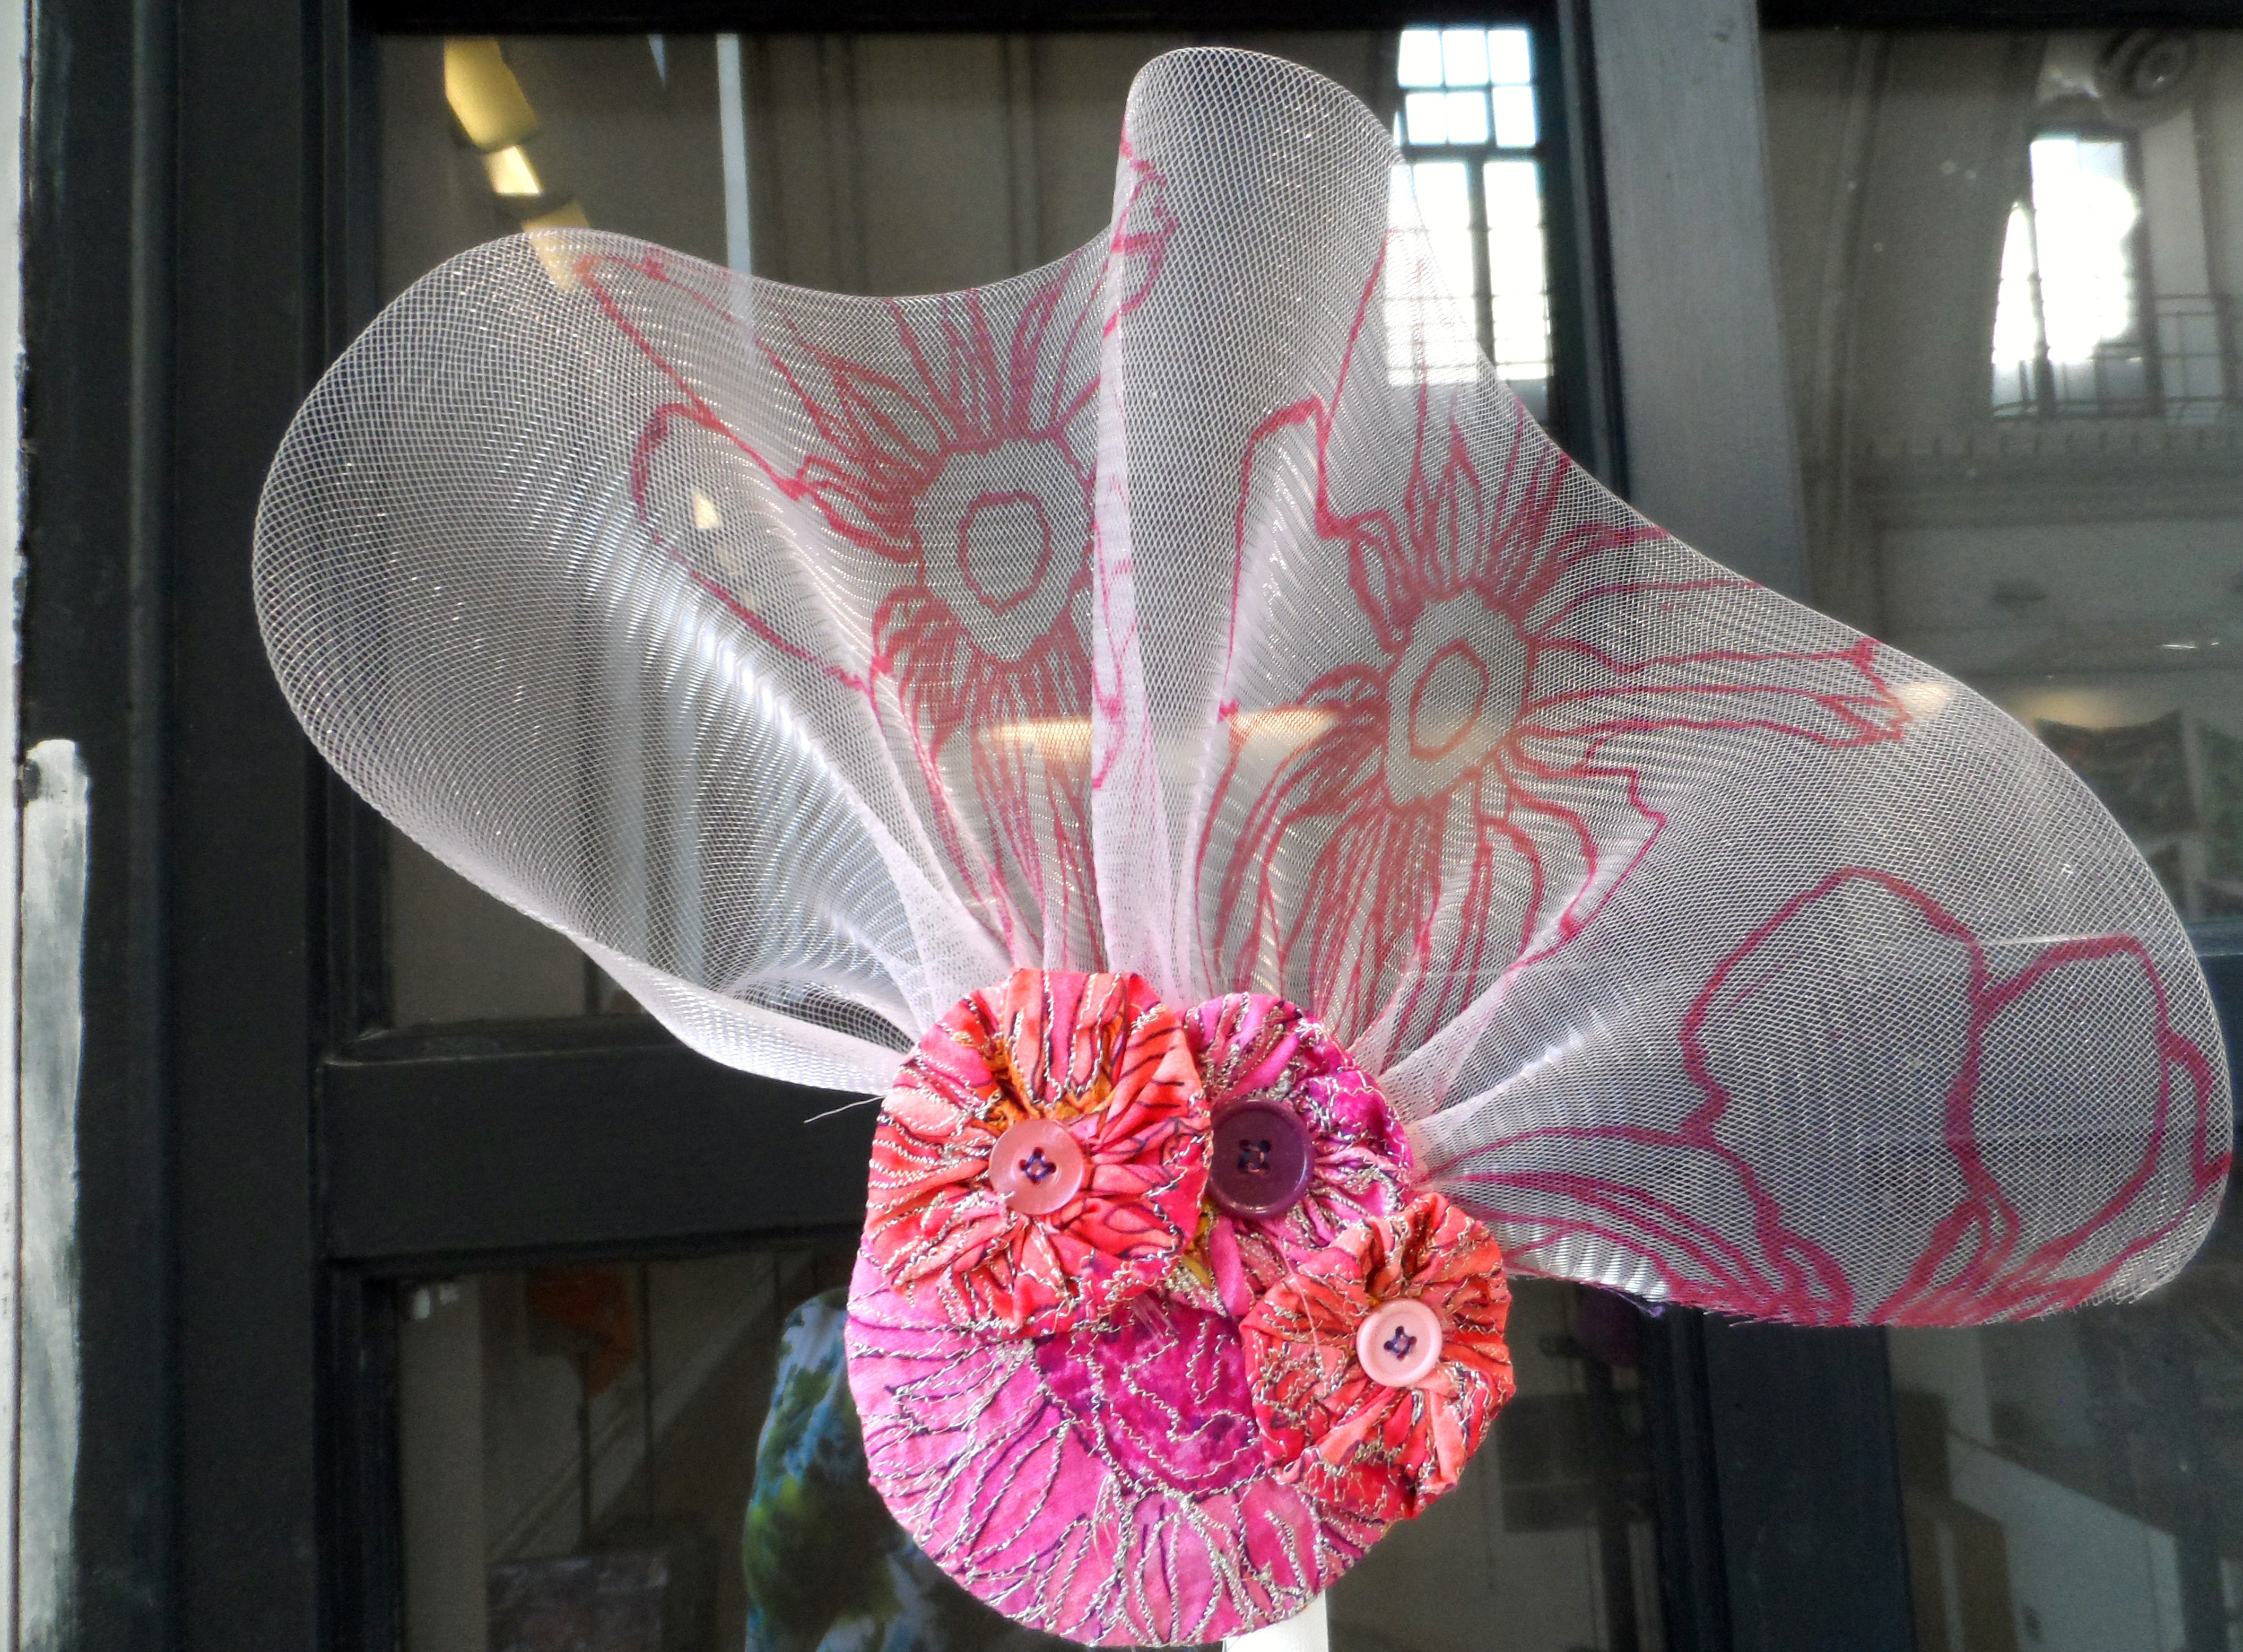 fascinator with embroidered detail by Jocelyn Barry, BA Design, Hope Uni Final Degree Show 2018